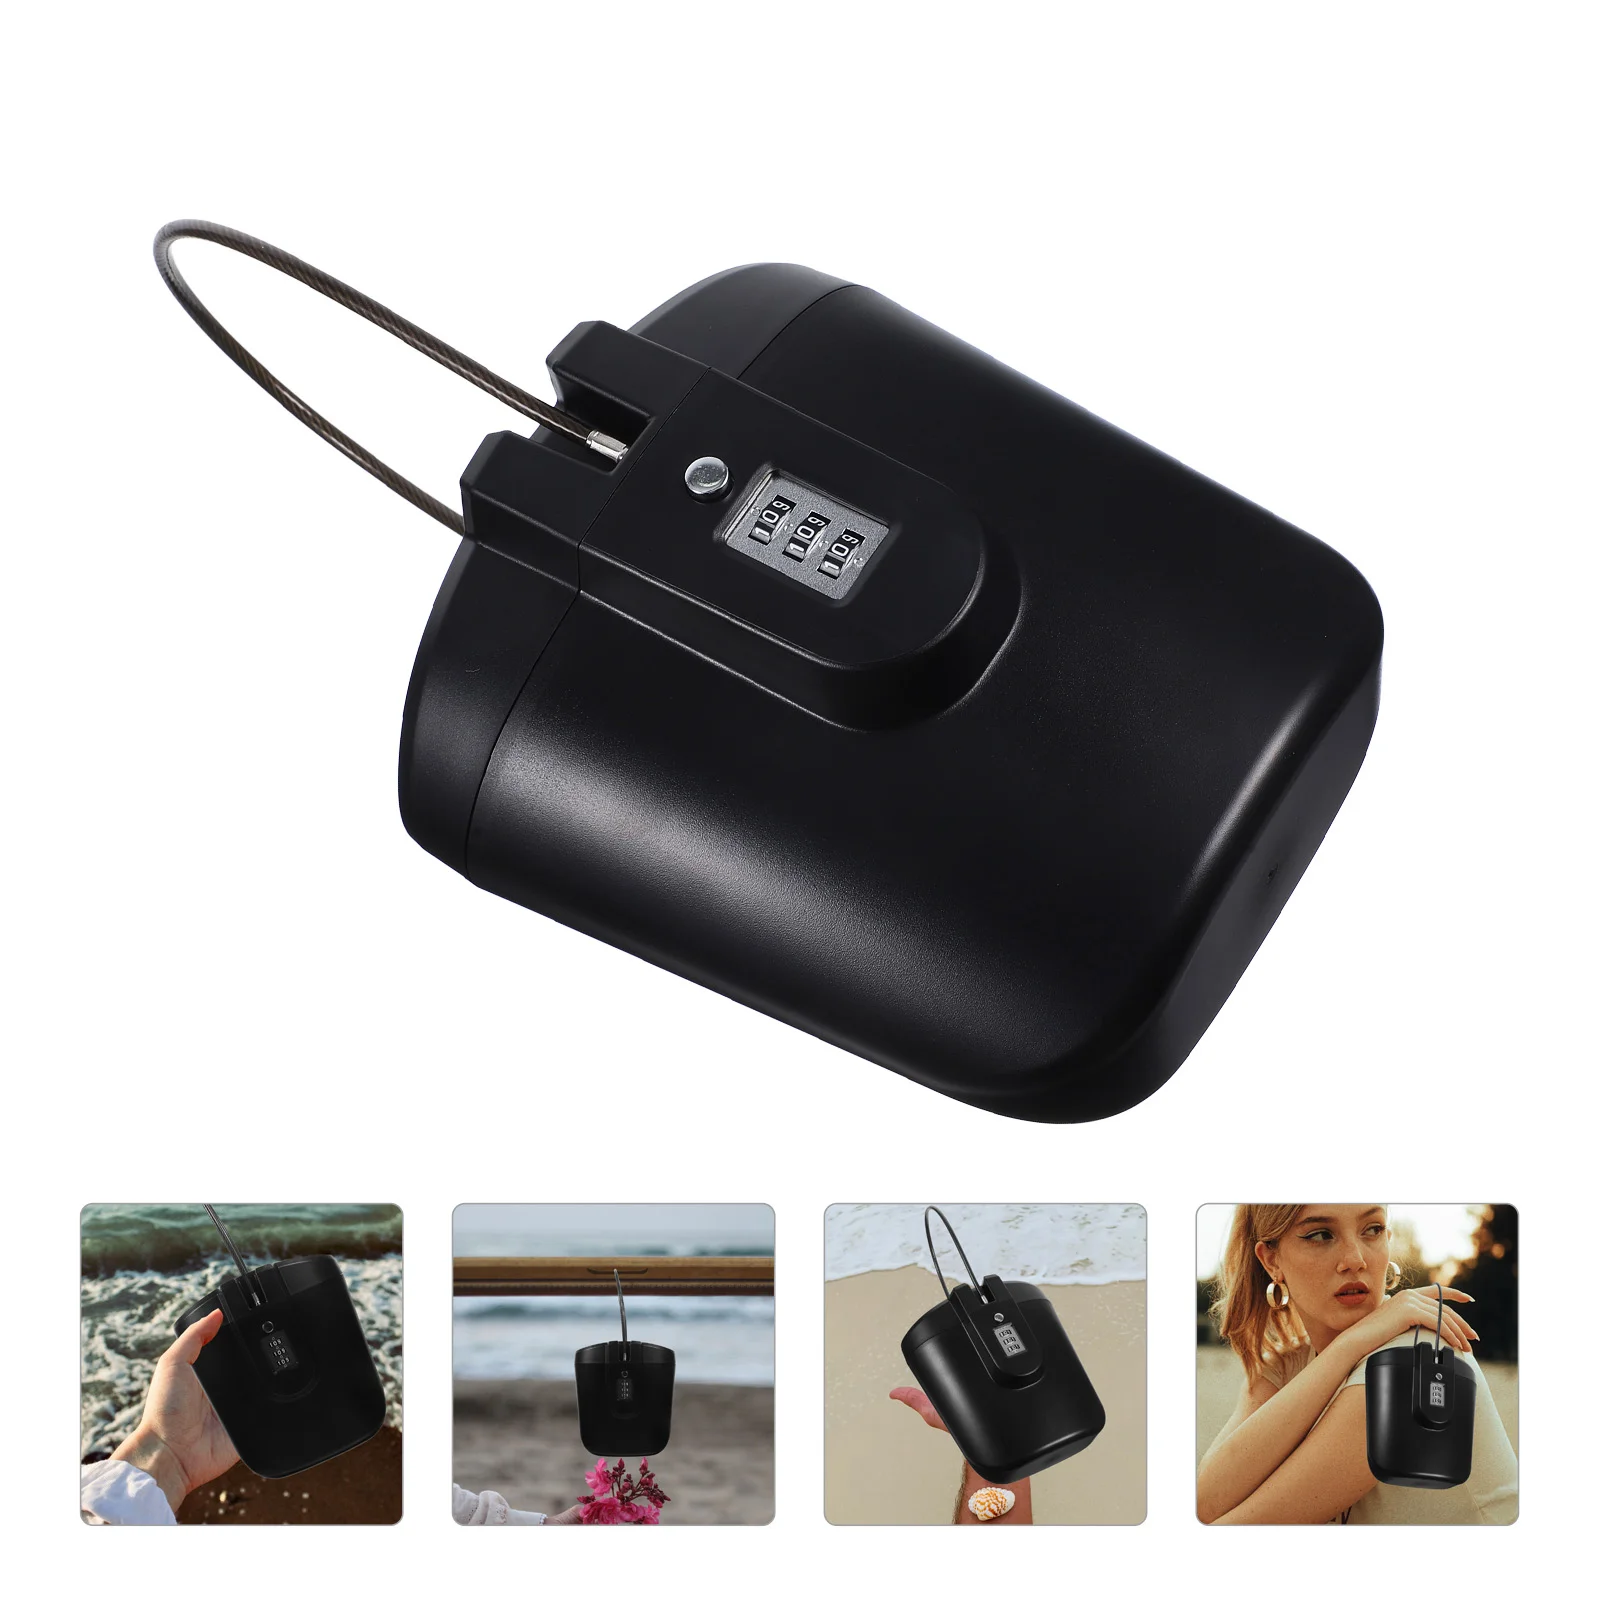 

Locks Traveling Bags Beach Safe Valuables Phone Dorm Room Safety Bucket College